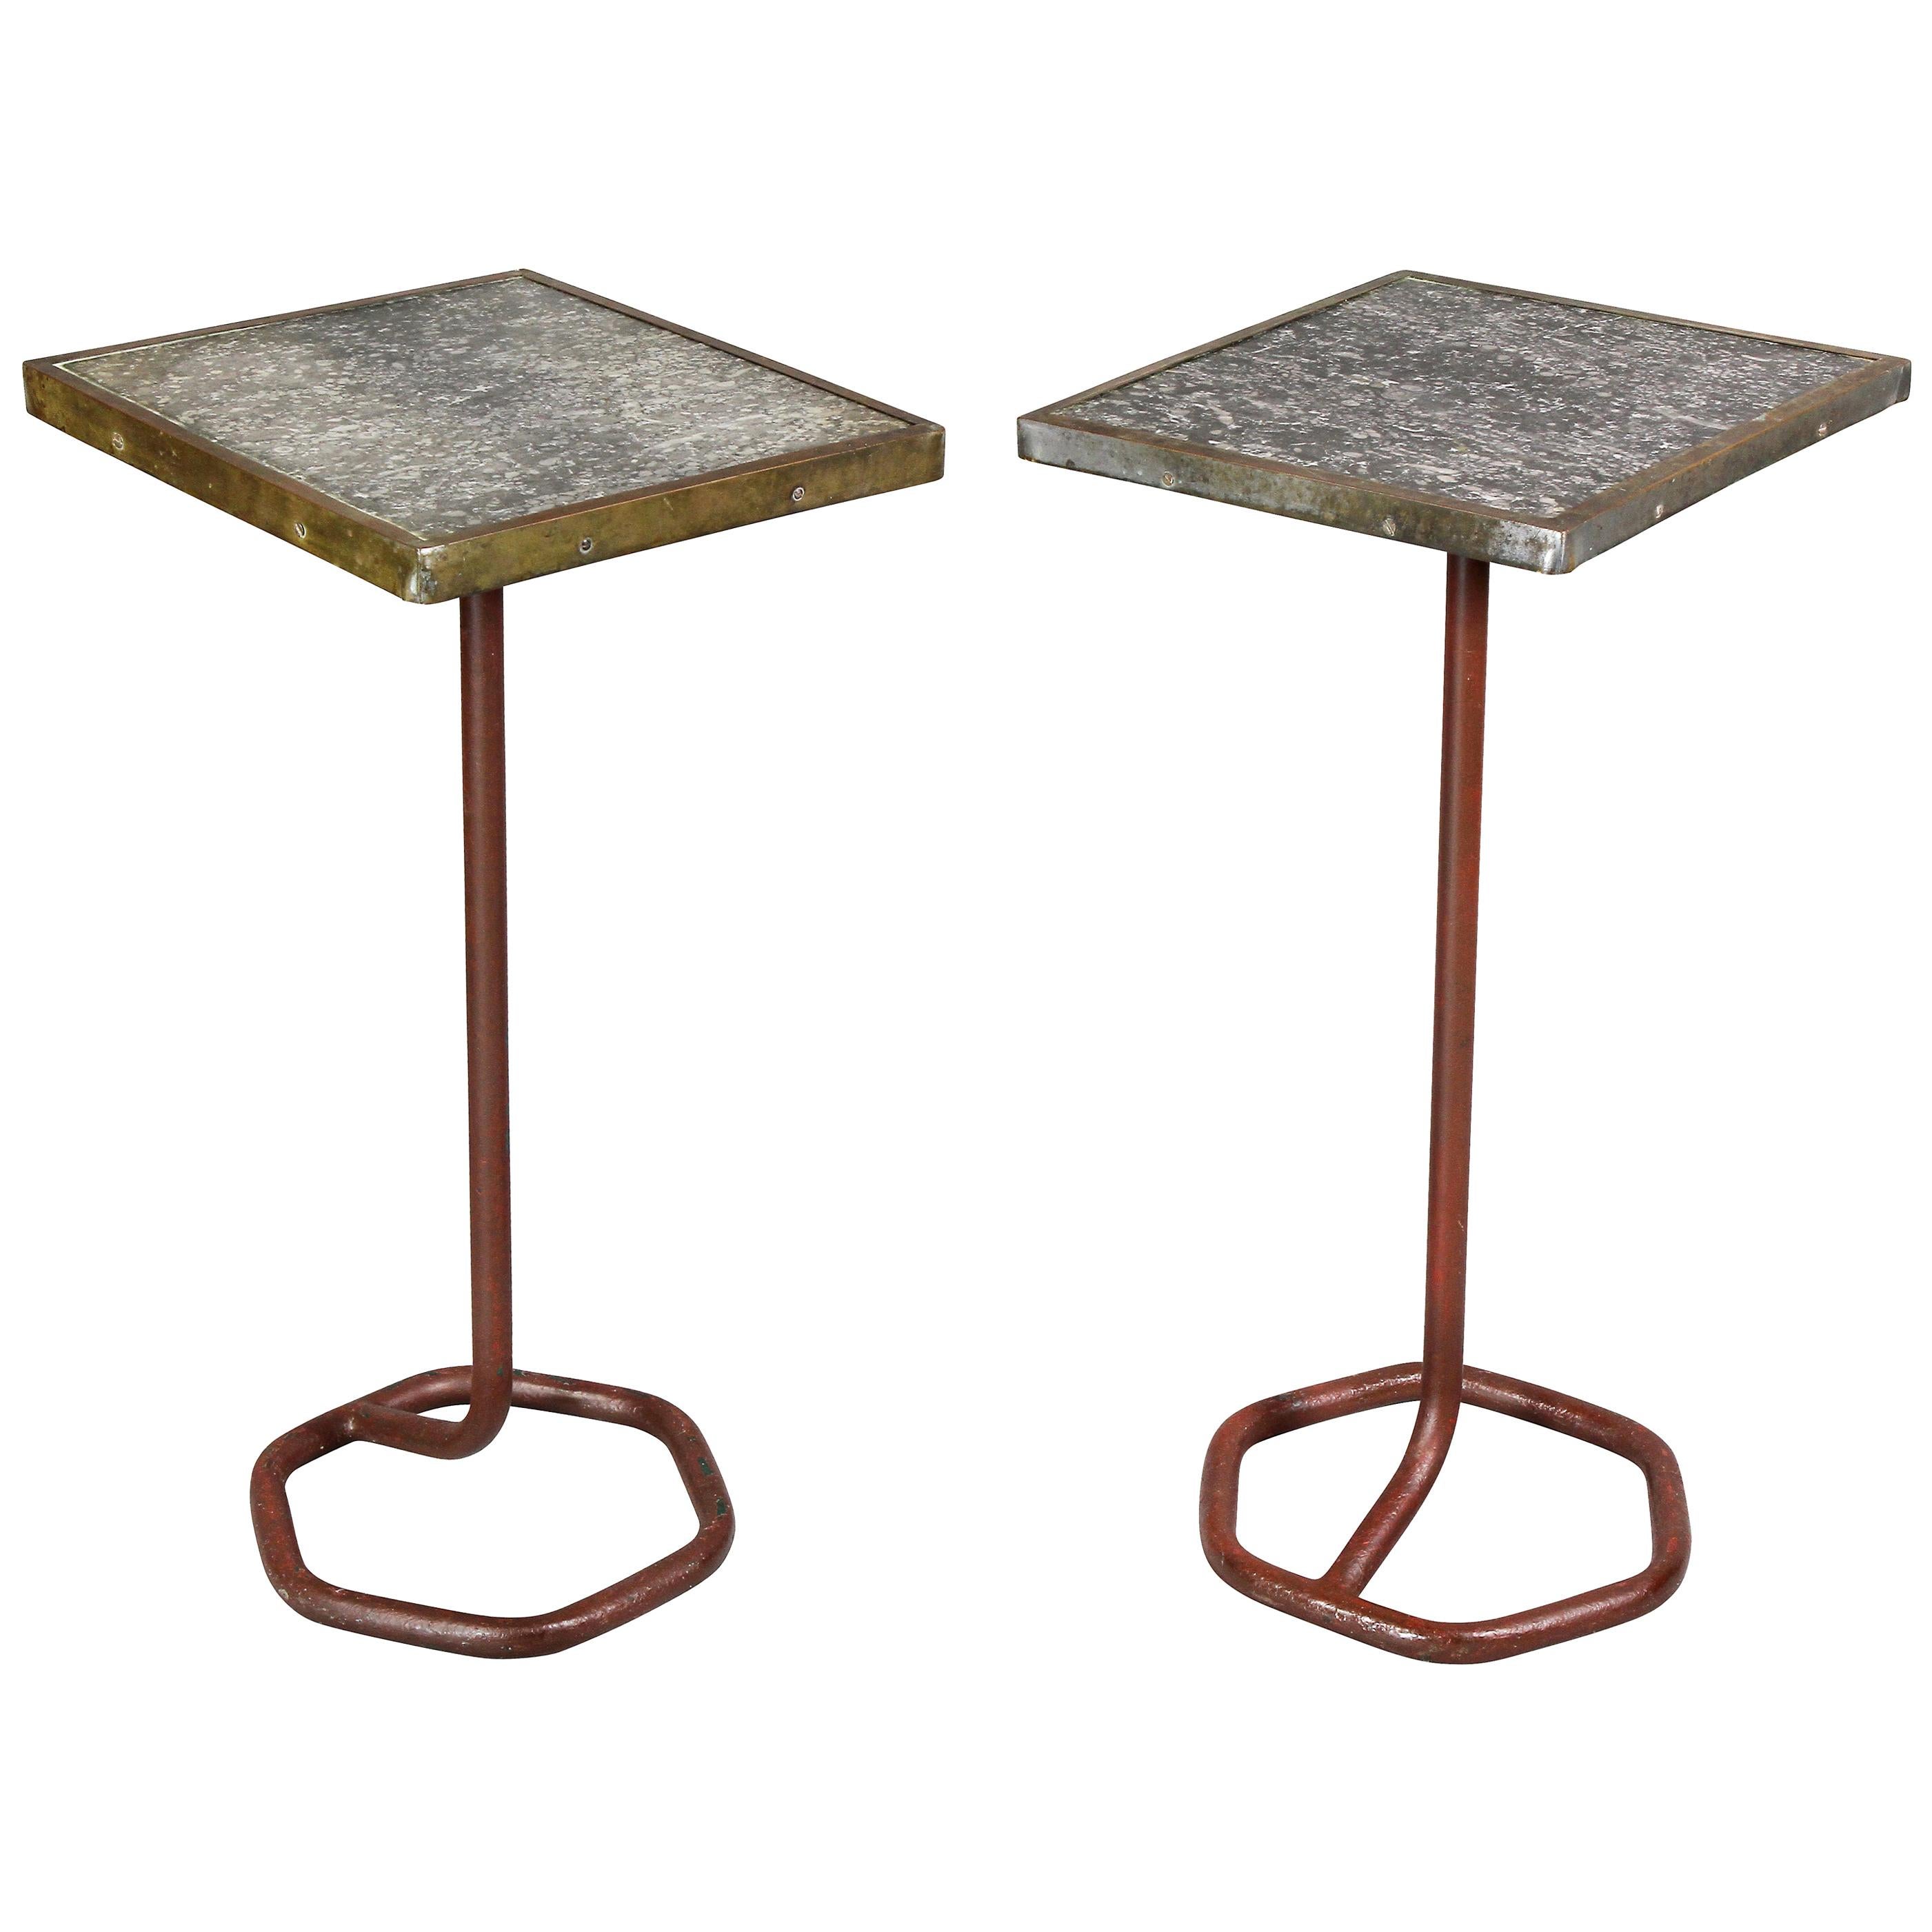 Pair of French Art Deco Cafe Tables by Cre-Rossi